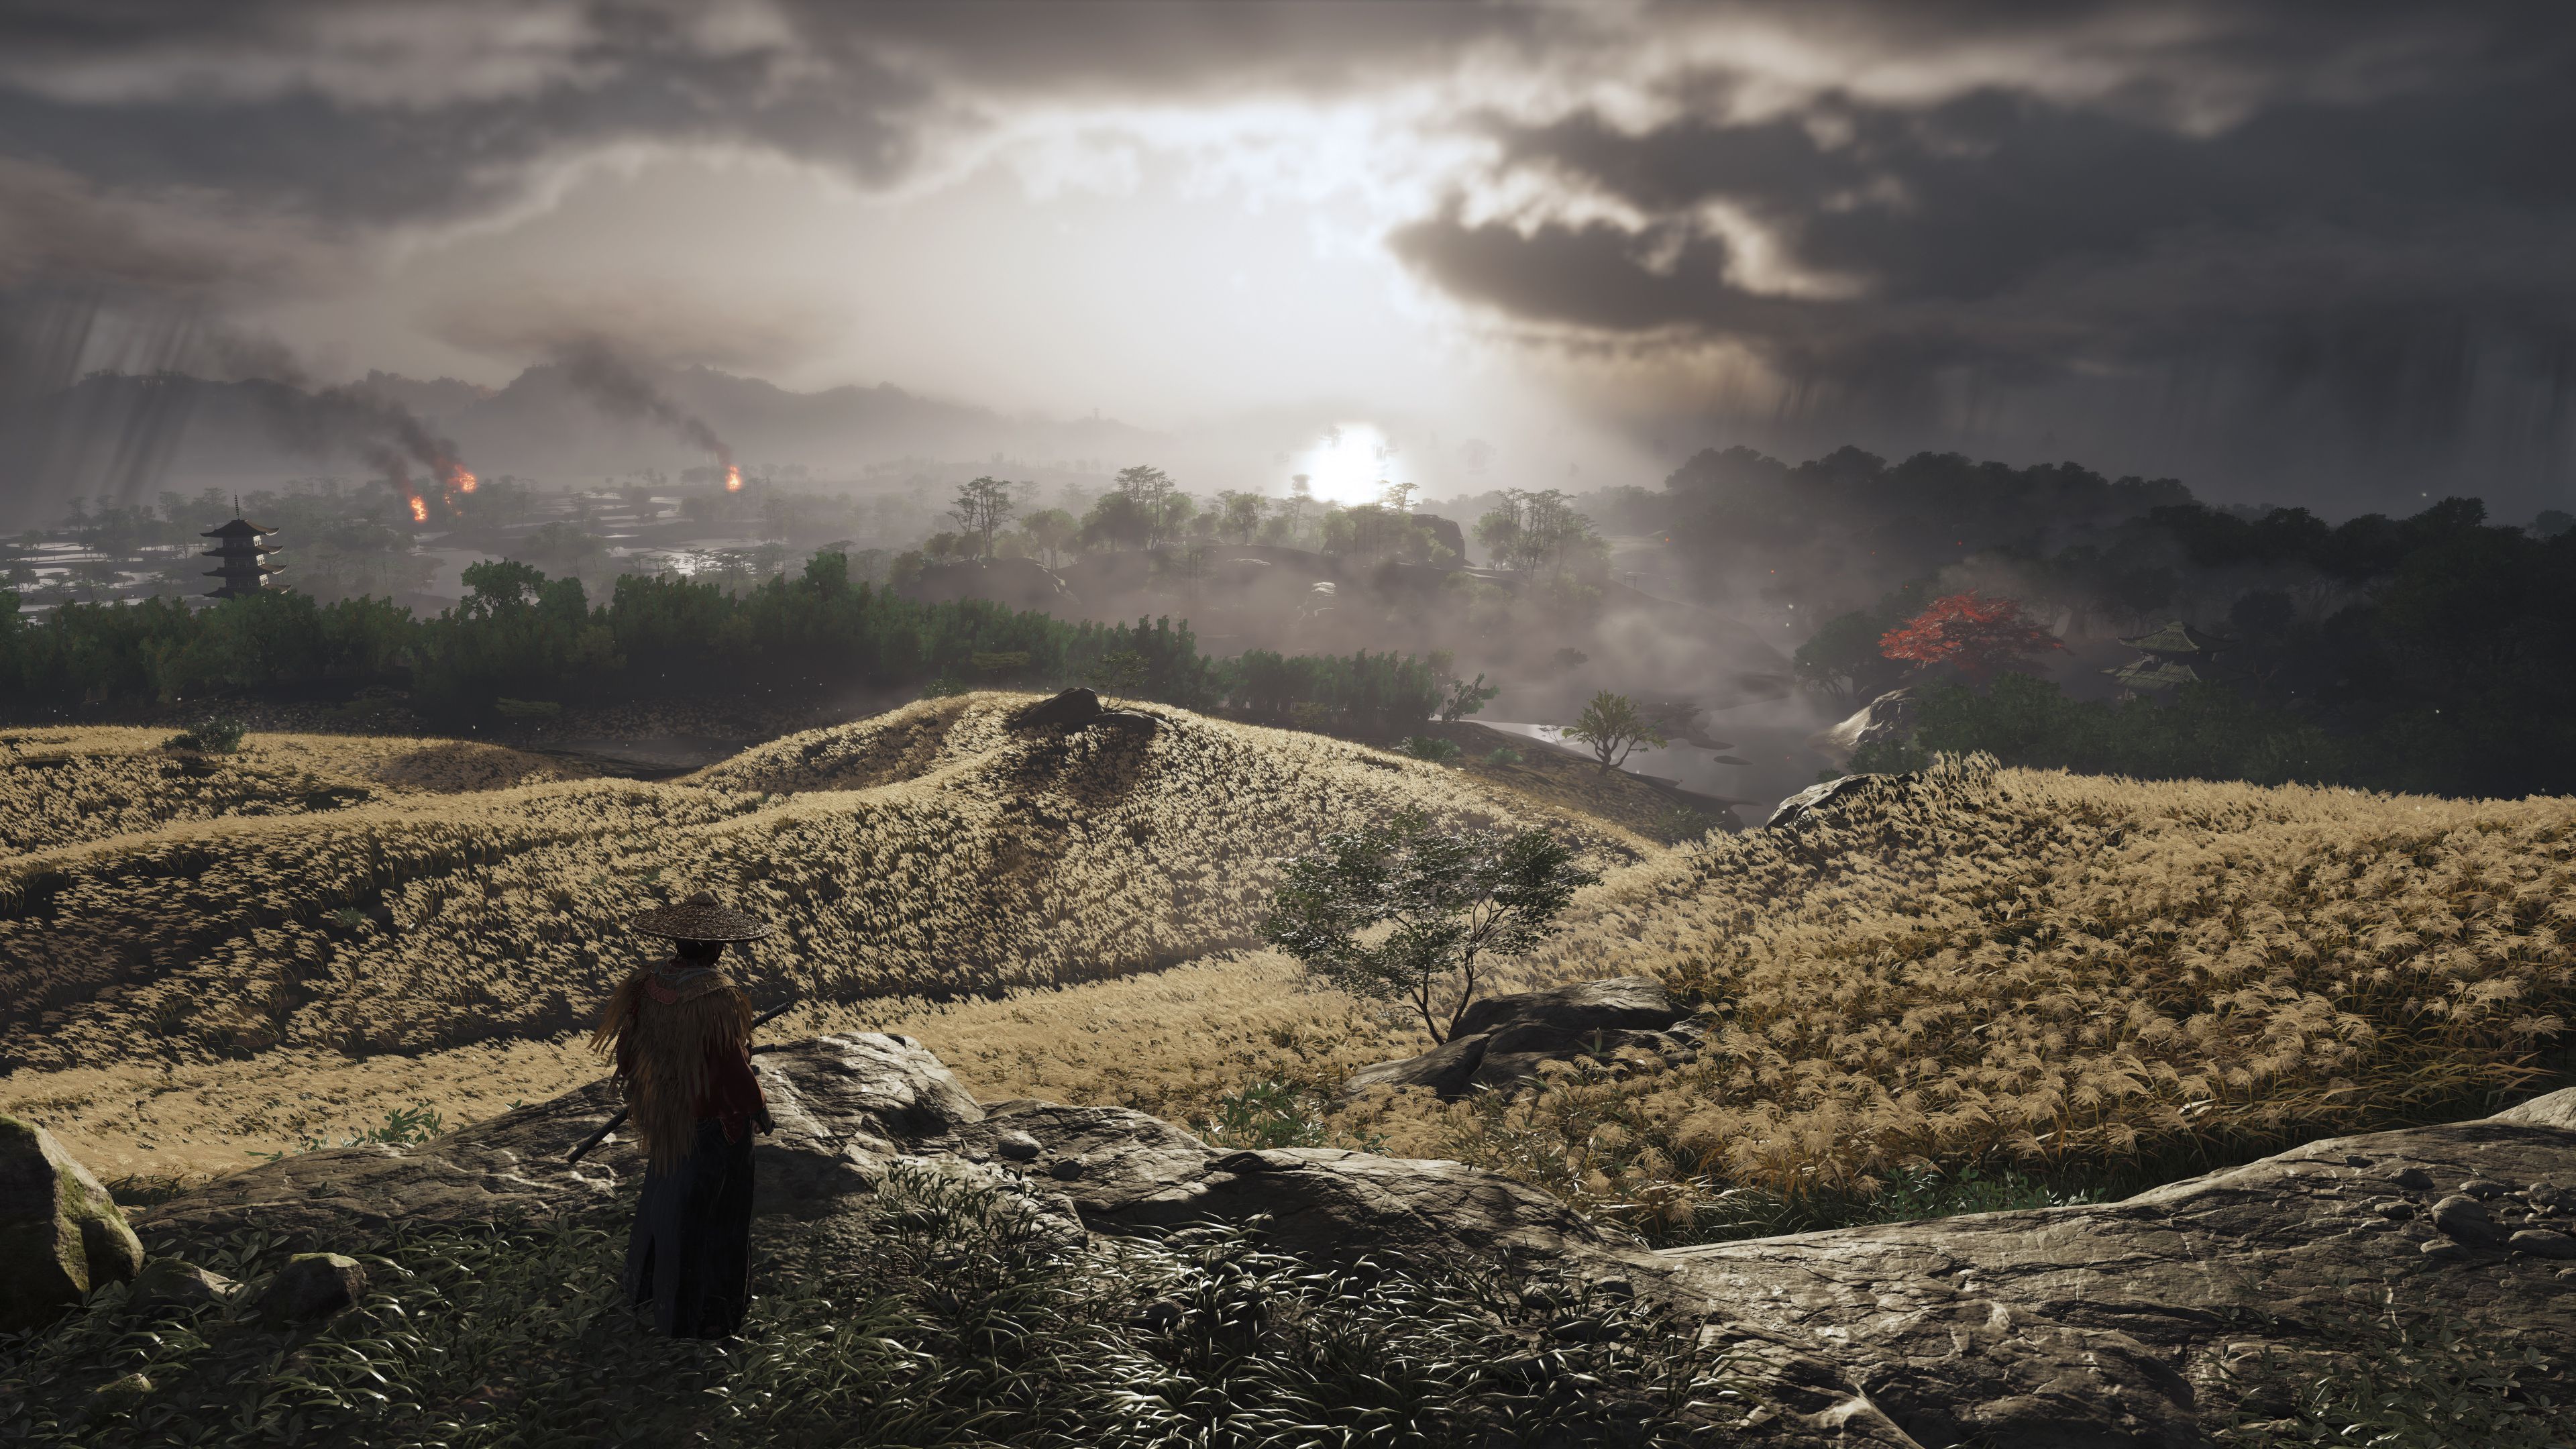 Ghost Of Tsushima PC Wallpapers - Wallpaper Cave